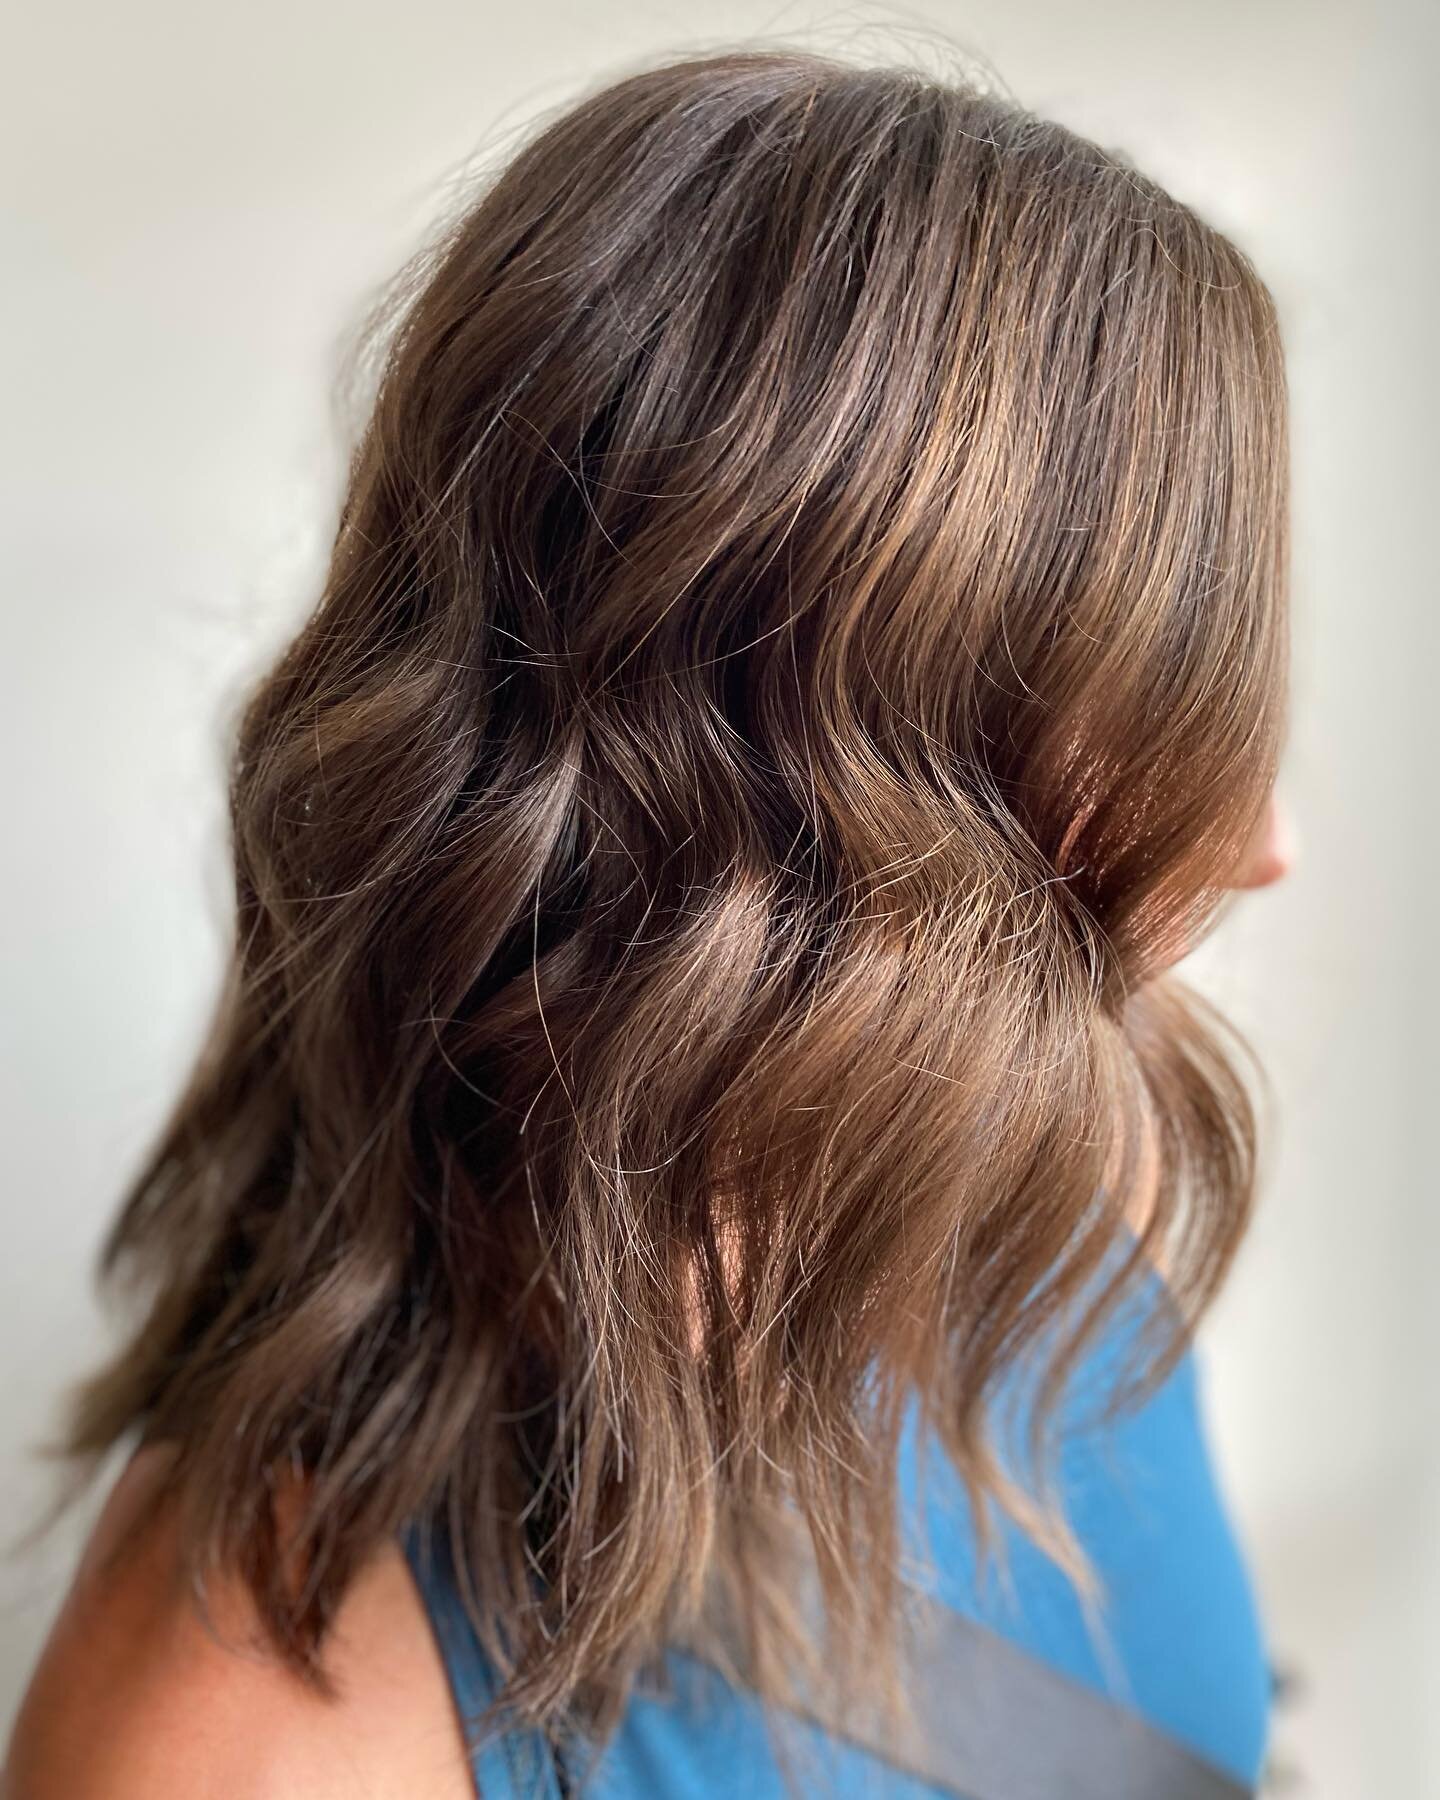 Today was full of dimensional brunettes!
.
I love that you can feel fall around the corner and going darker just feels right.
.
#dimentionalbrunette #cohairstylist #coloradohairstylist #haircolorist #hairstylist #719 #719stylist #hmua #719hairstylist